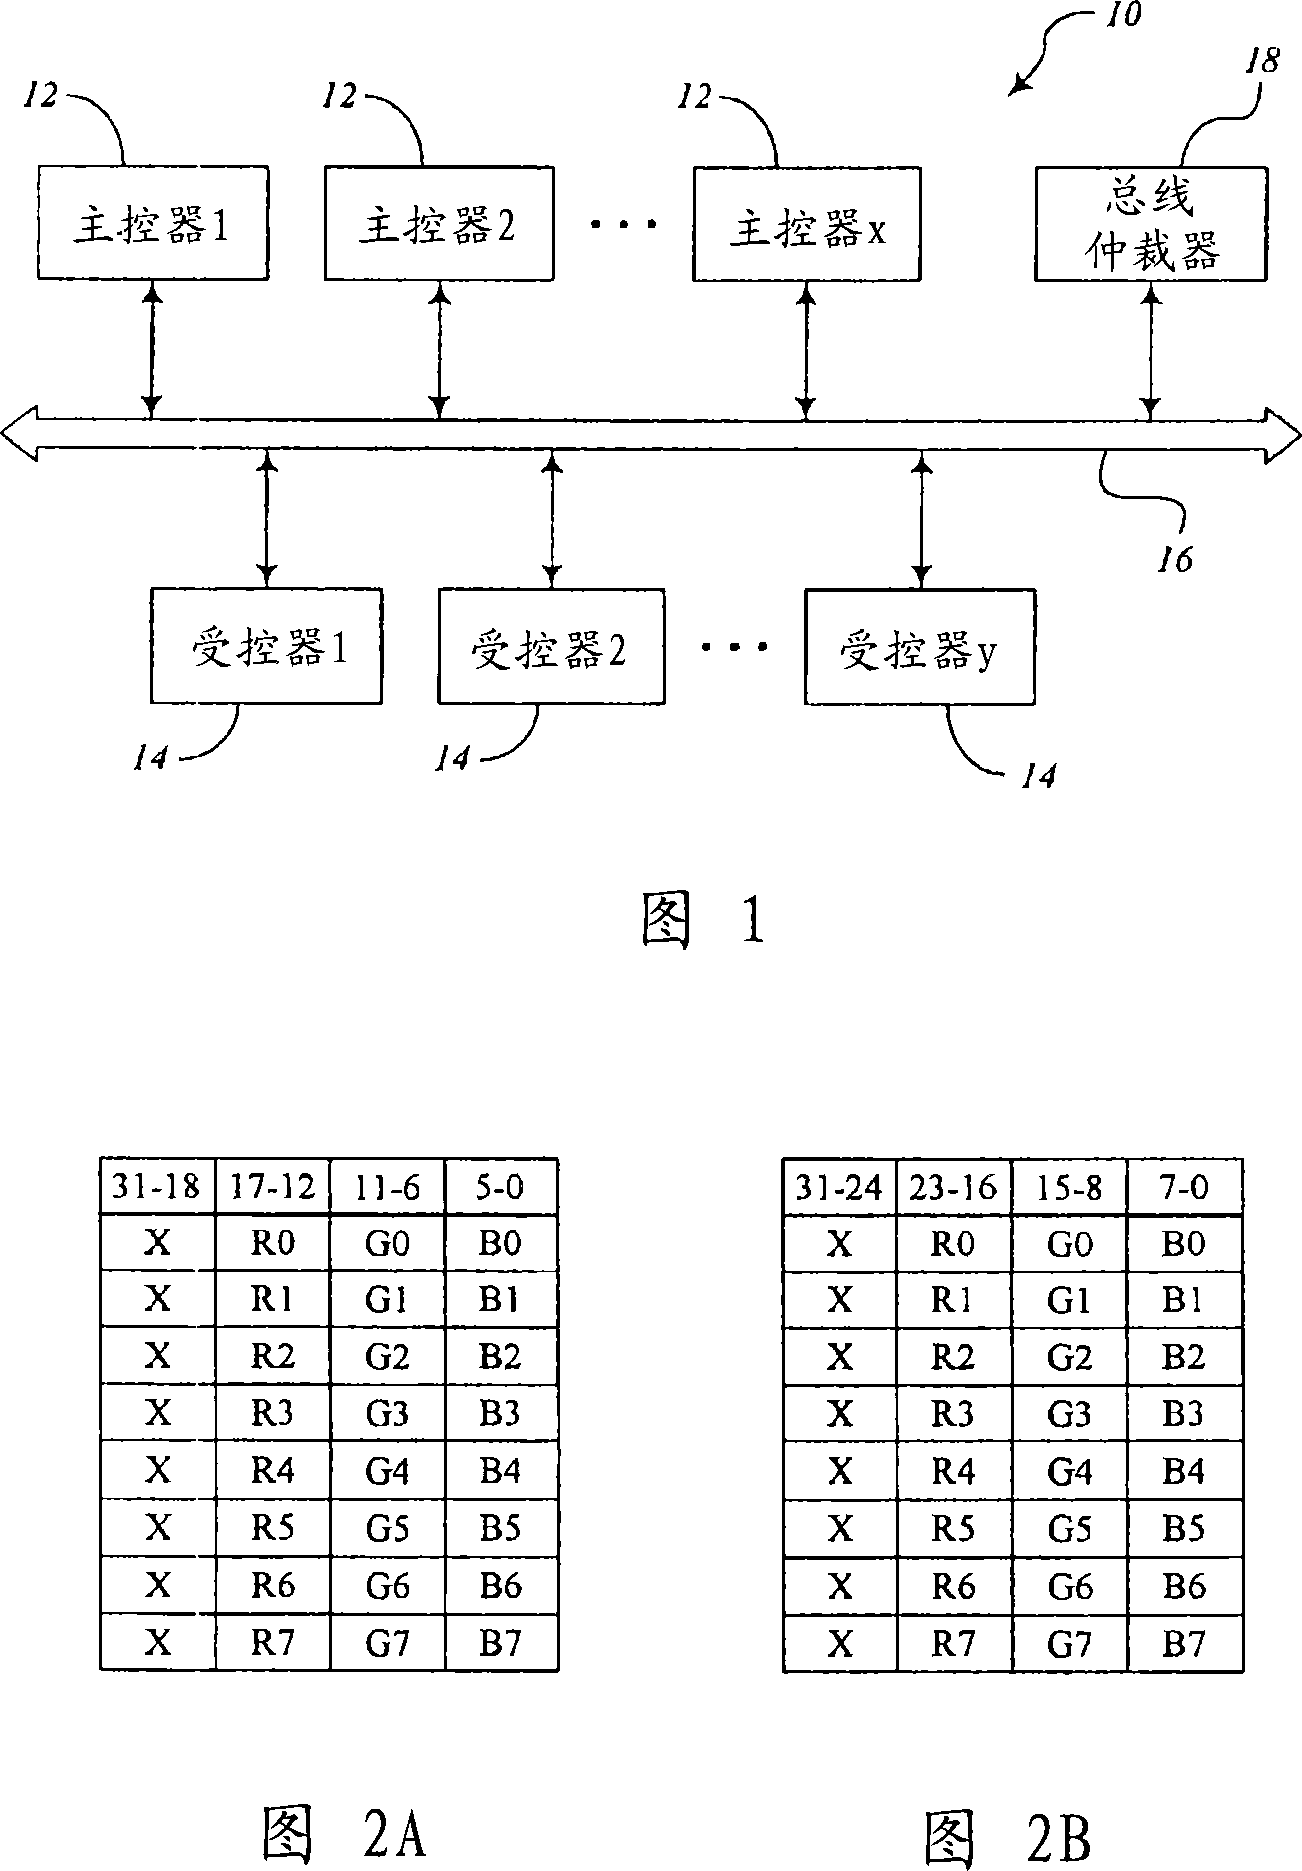 System and method for video data compression